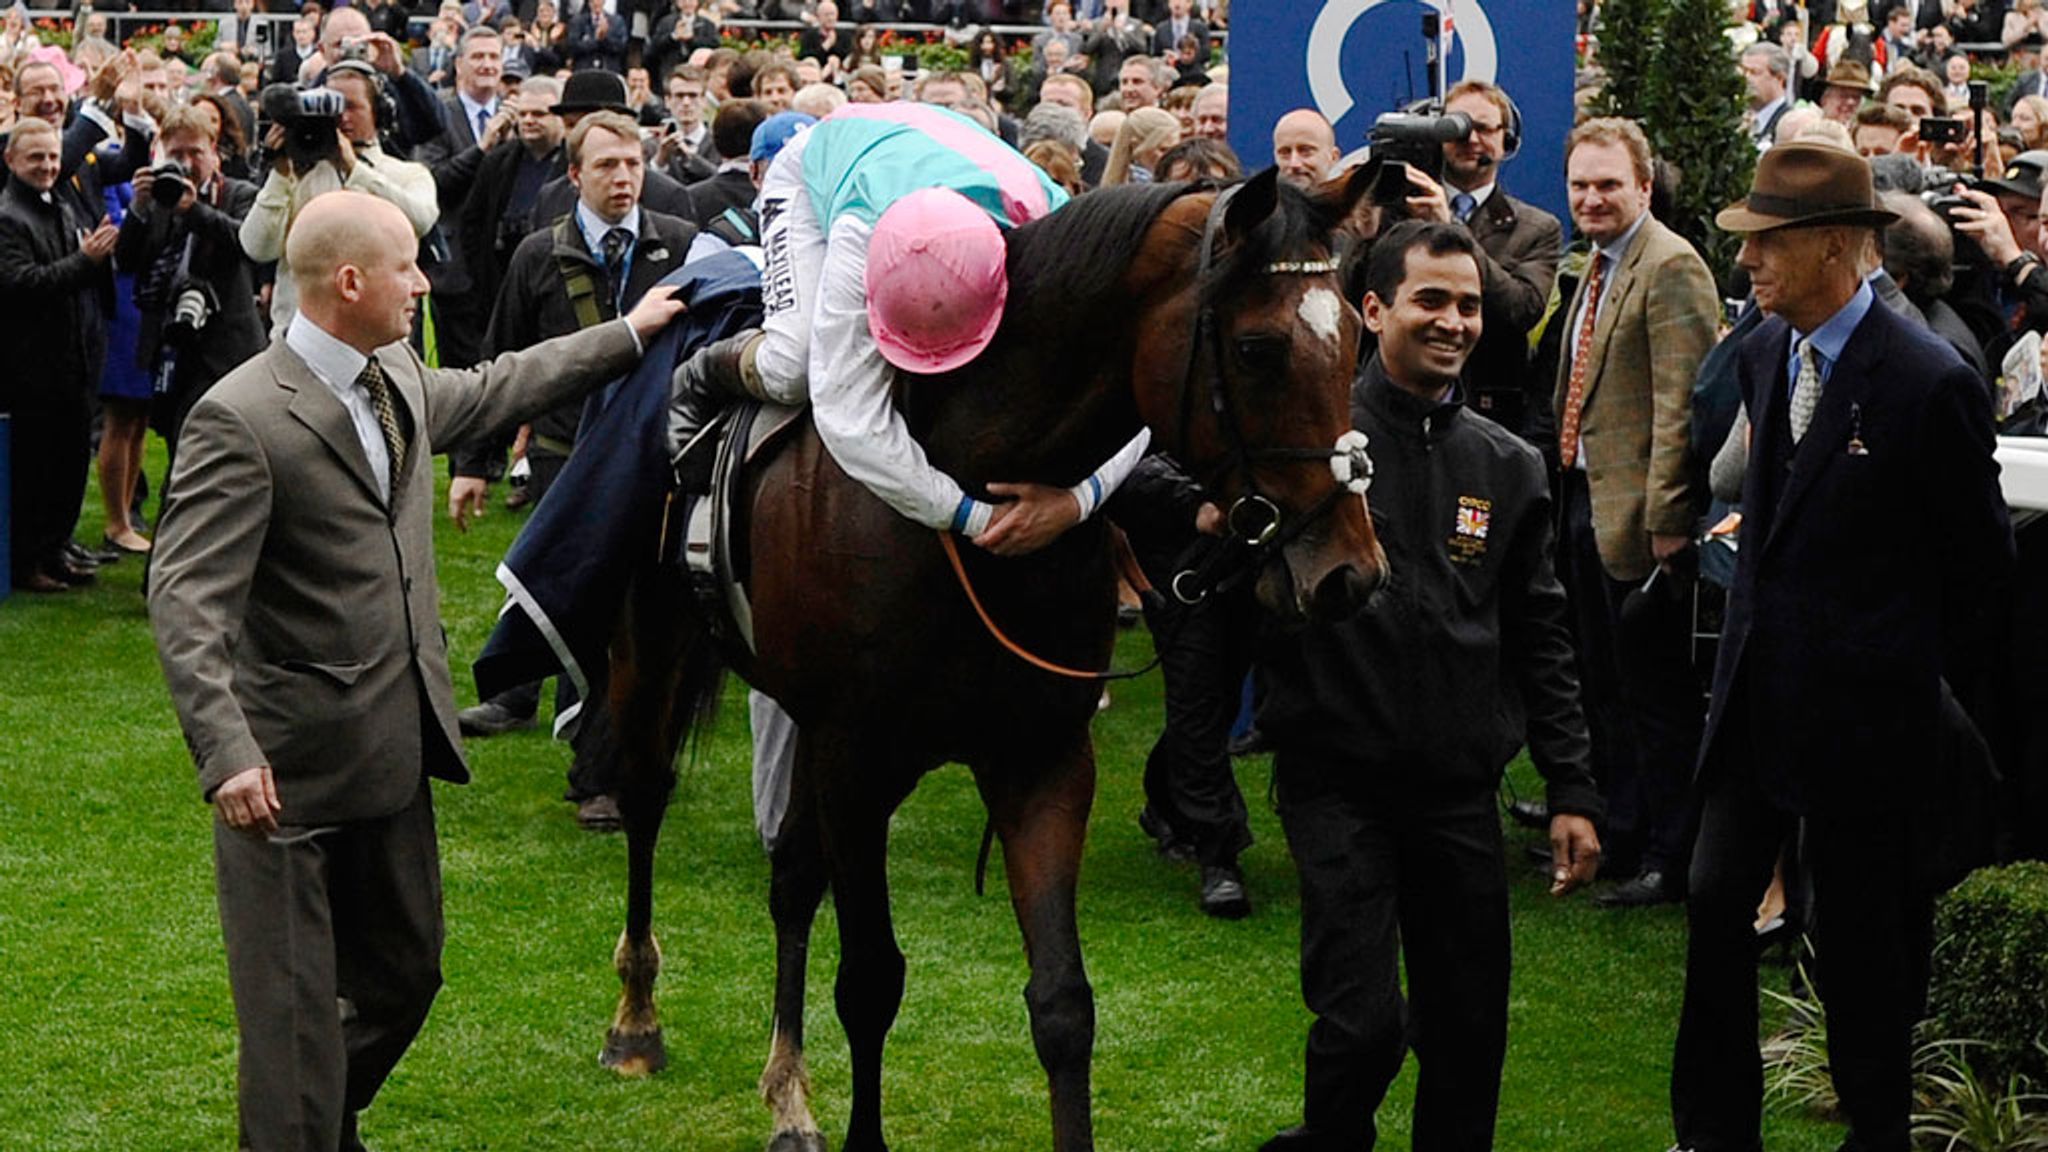 Juddmonte Farms have announced that Frankel will stand at a stud fee of